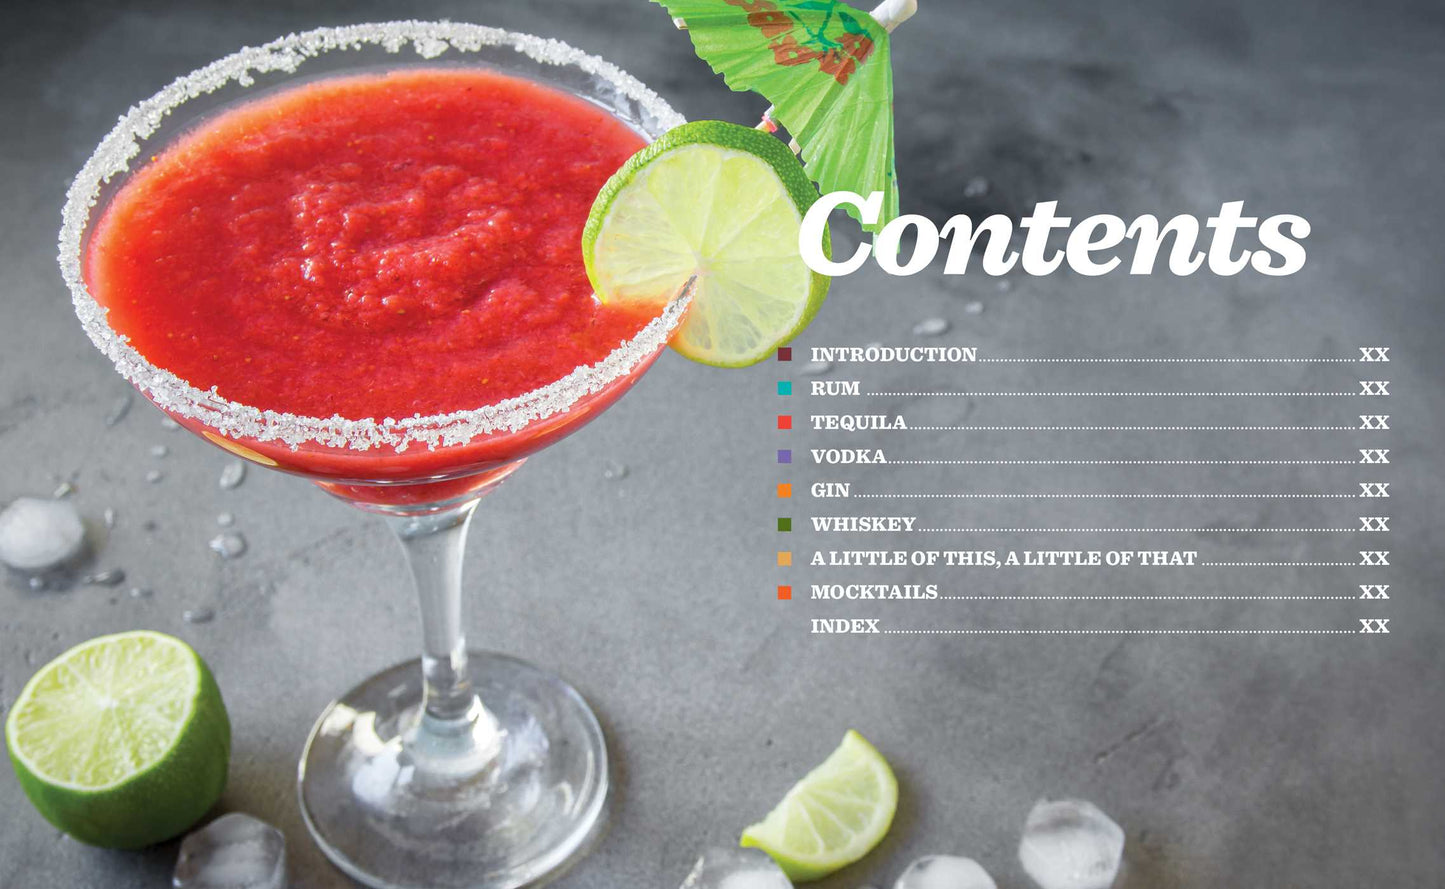 Frozen Cocktails: Over 100 Drinks for Relaxed and Refreshing Entertaining